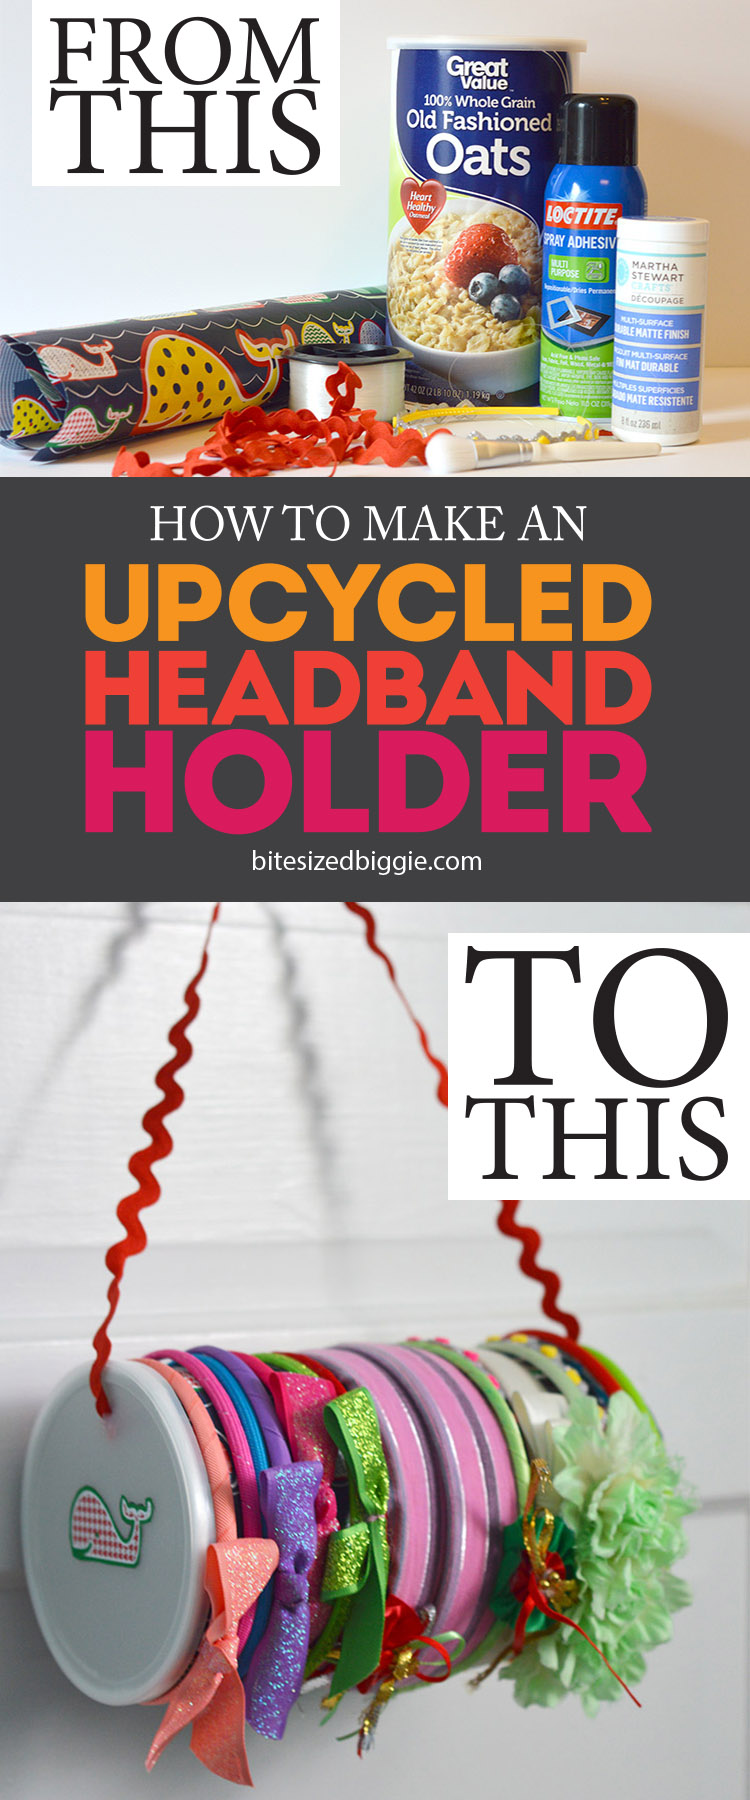 How to make an upcycled headband holder - this simple craft holds headbands on the outside and holds tons of smaller hair accessories inside!